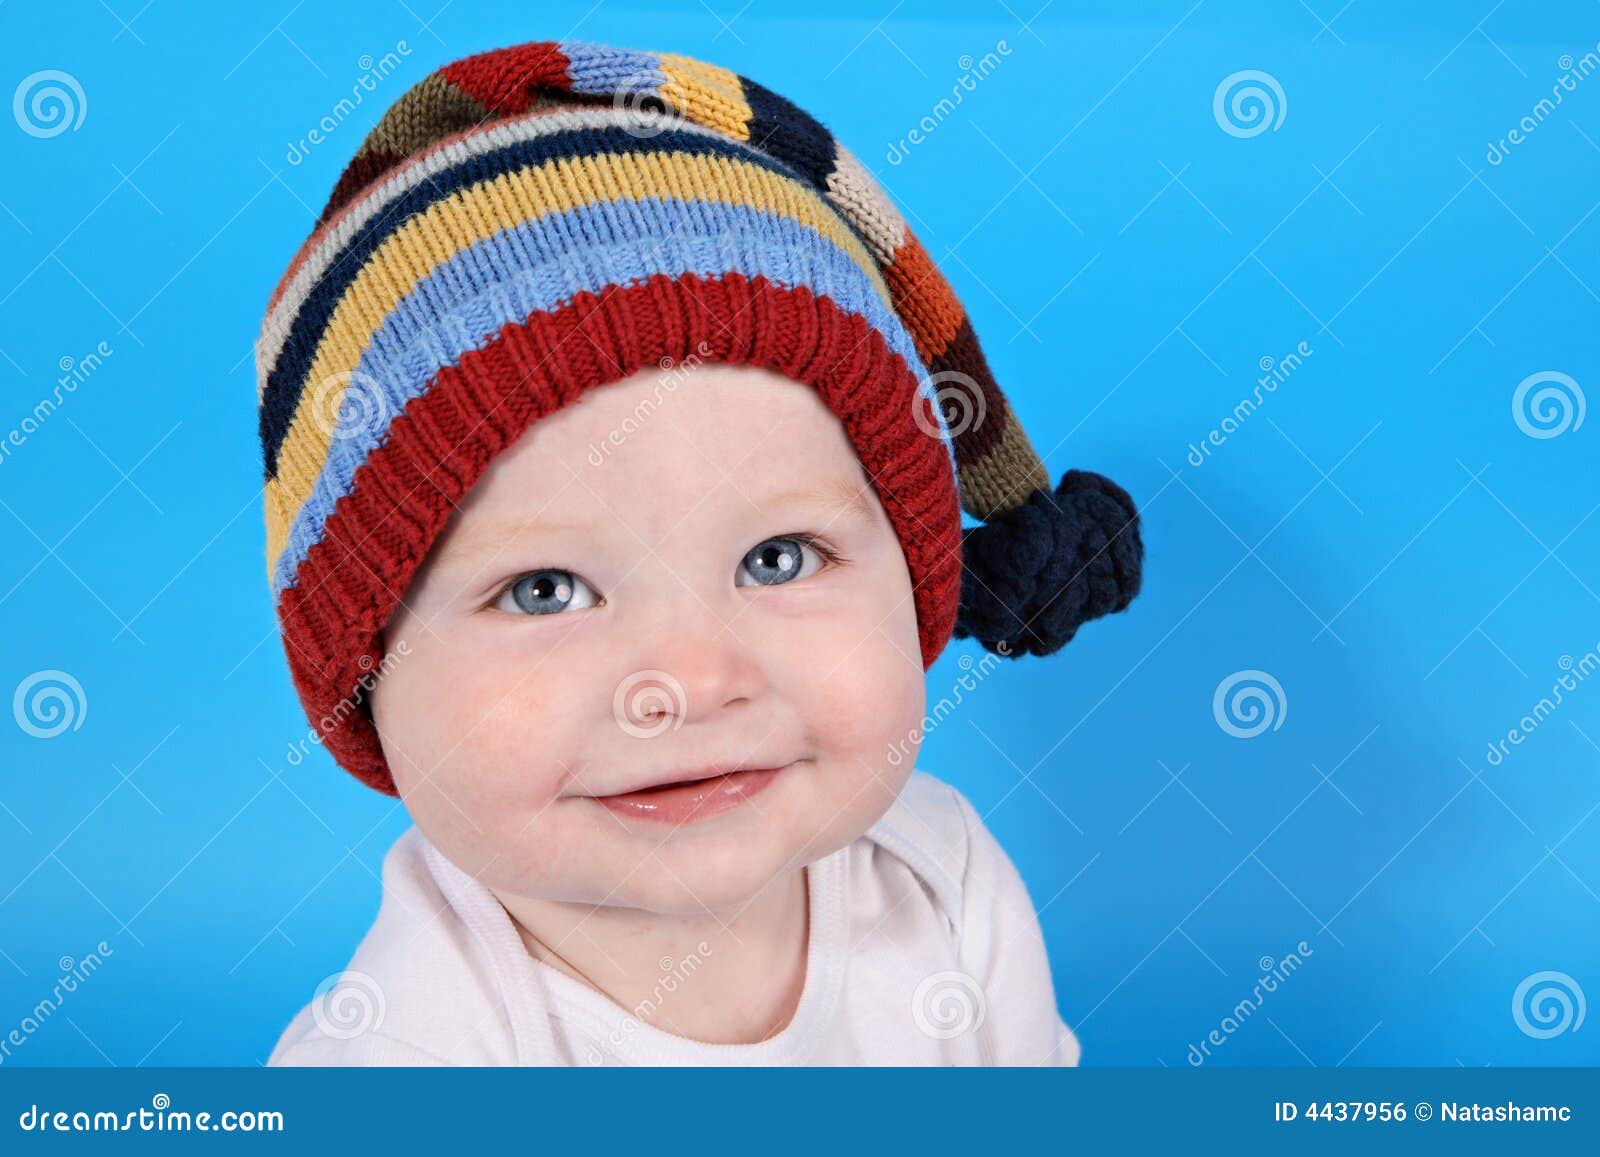 Baby boy with hat stock photo. Image of little, face, adorable - 4437956